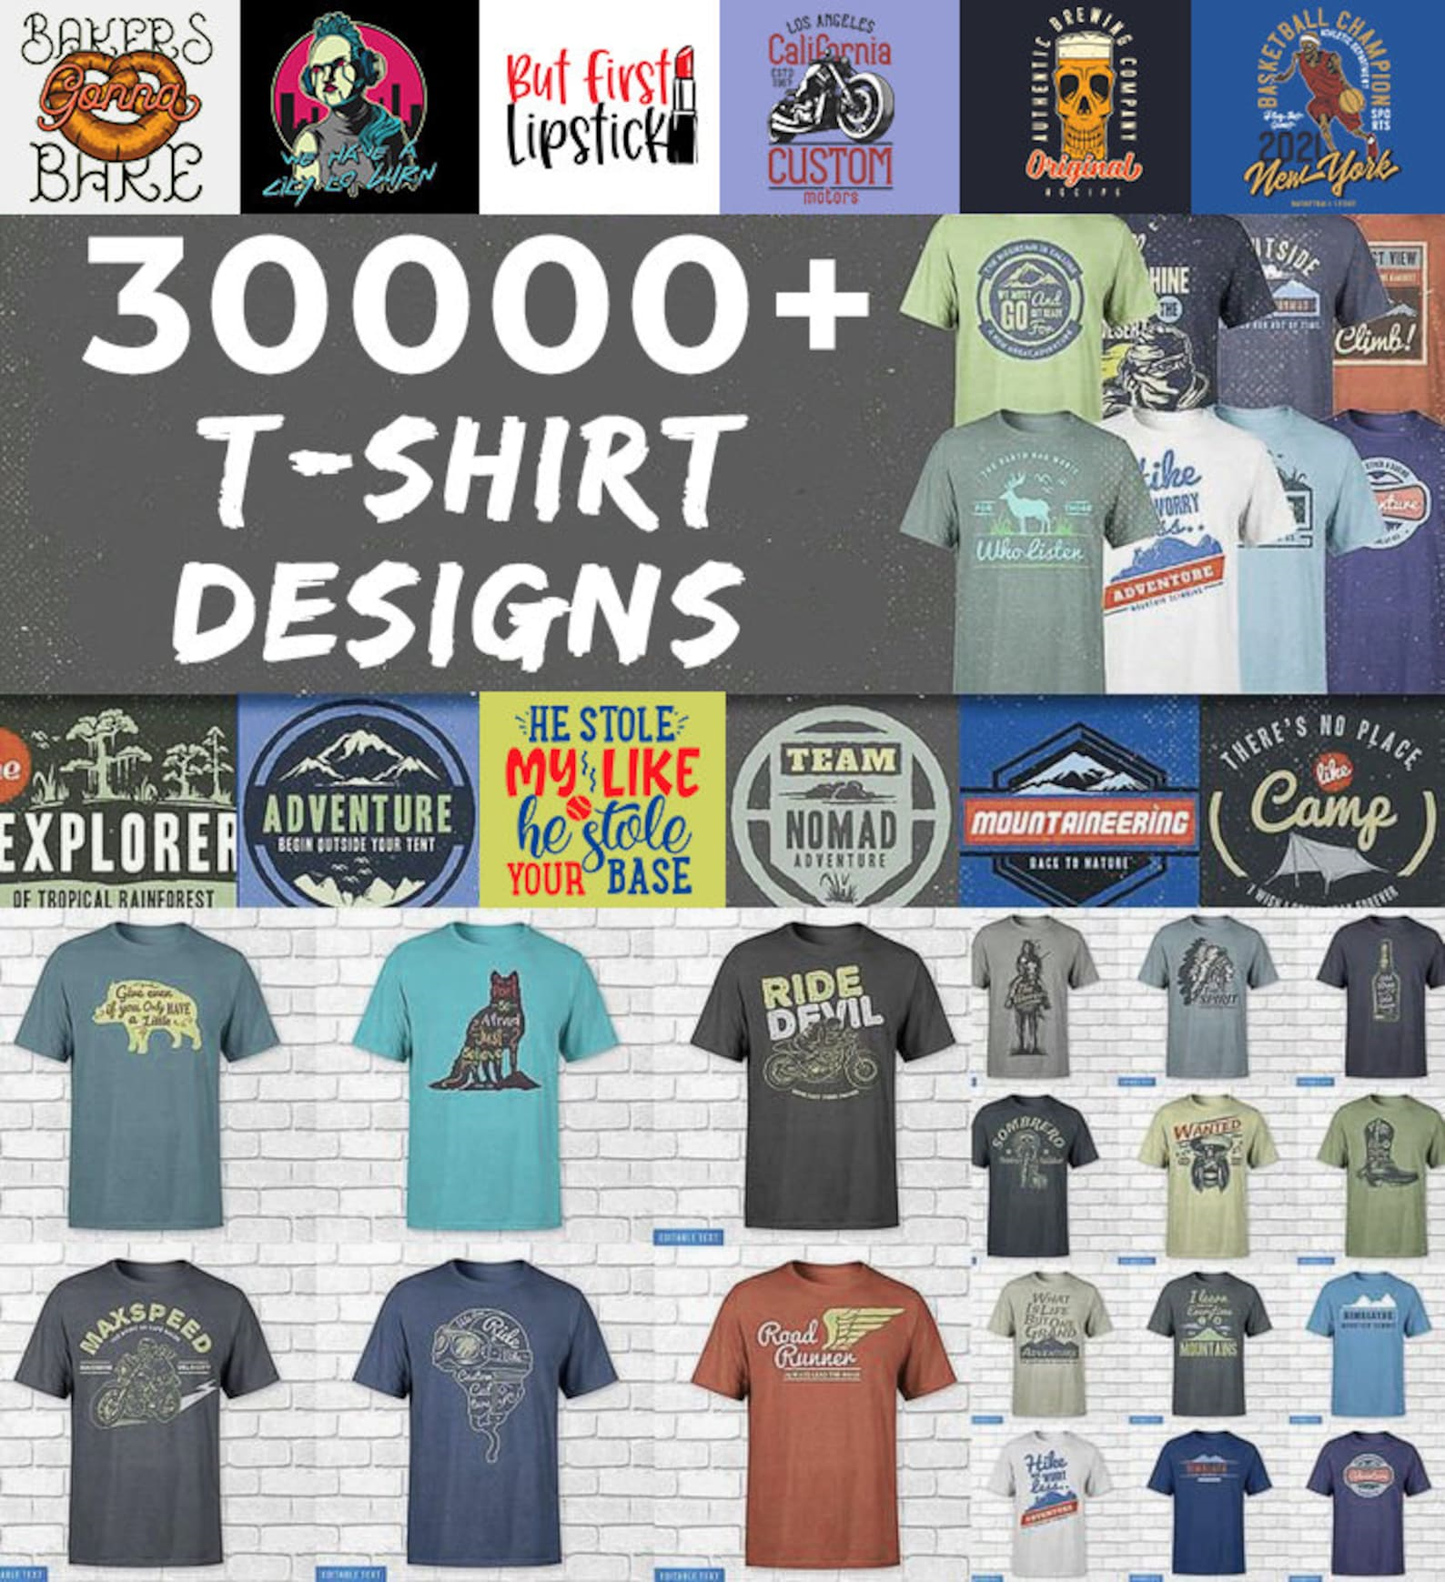 30,000 T-shirt designs for printing business for 6 euros